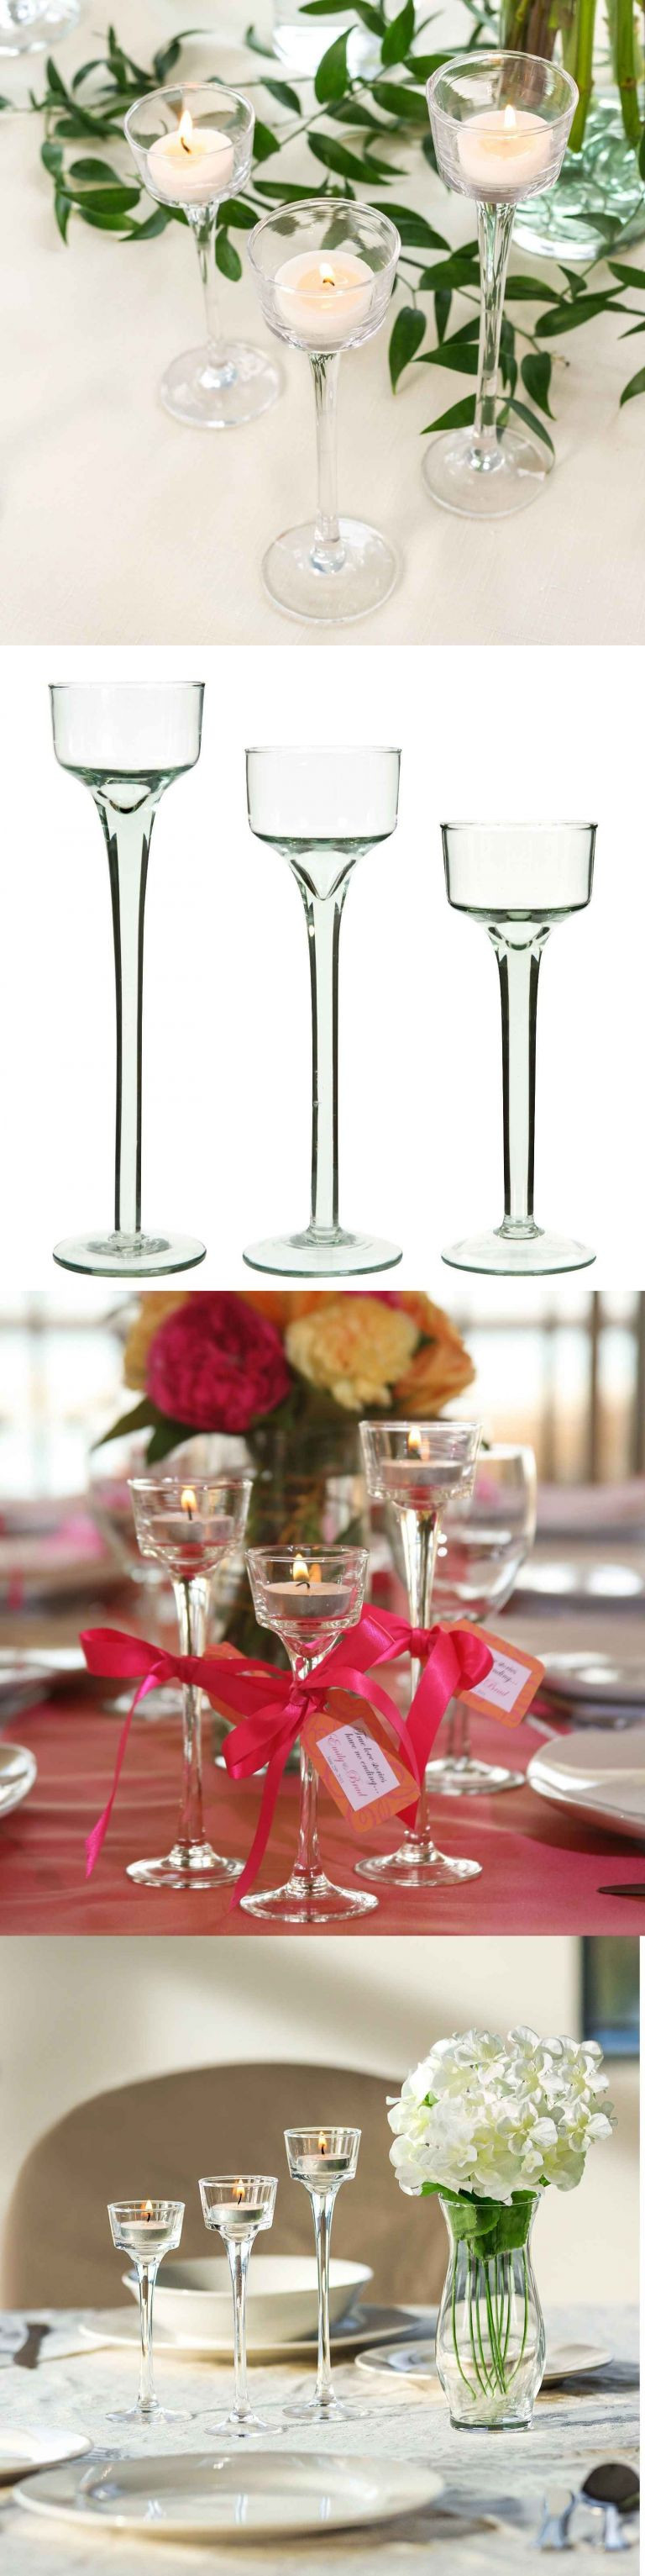 Rent Glass Cylinder Vases Of Gold Mercury Glass Vases Fresh Faux Crystal Candle Holders Alive In Gold Mercury Glass Vases Fresh Faux Crystal Candle Holders Alive Vases Gold Tall Jpgi 0d Cheap In